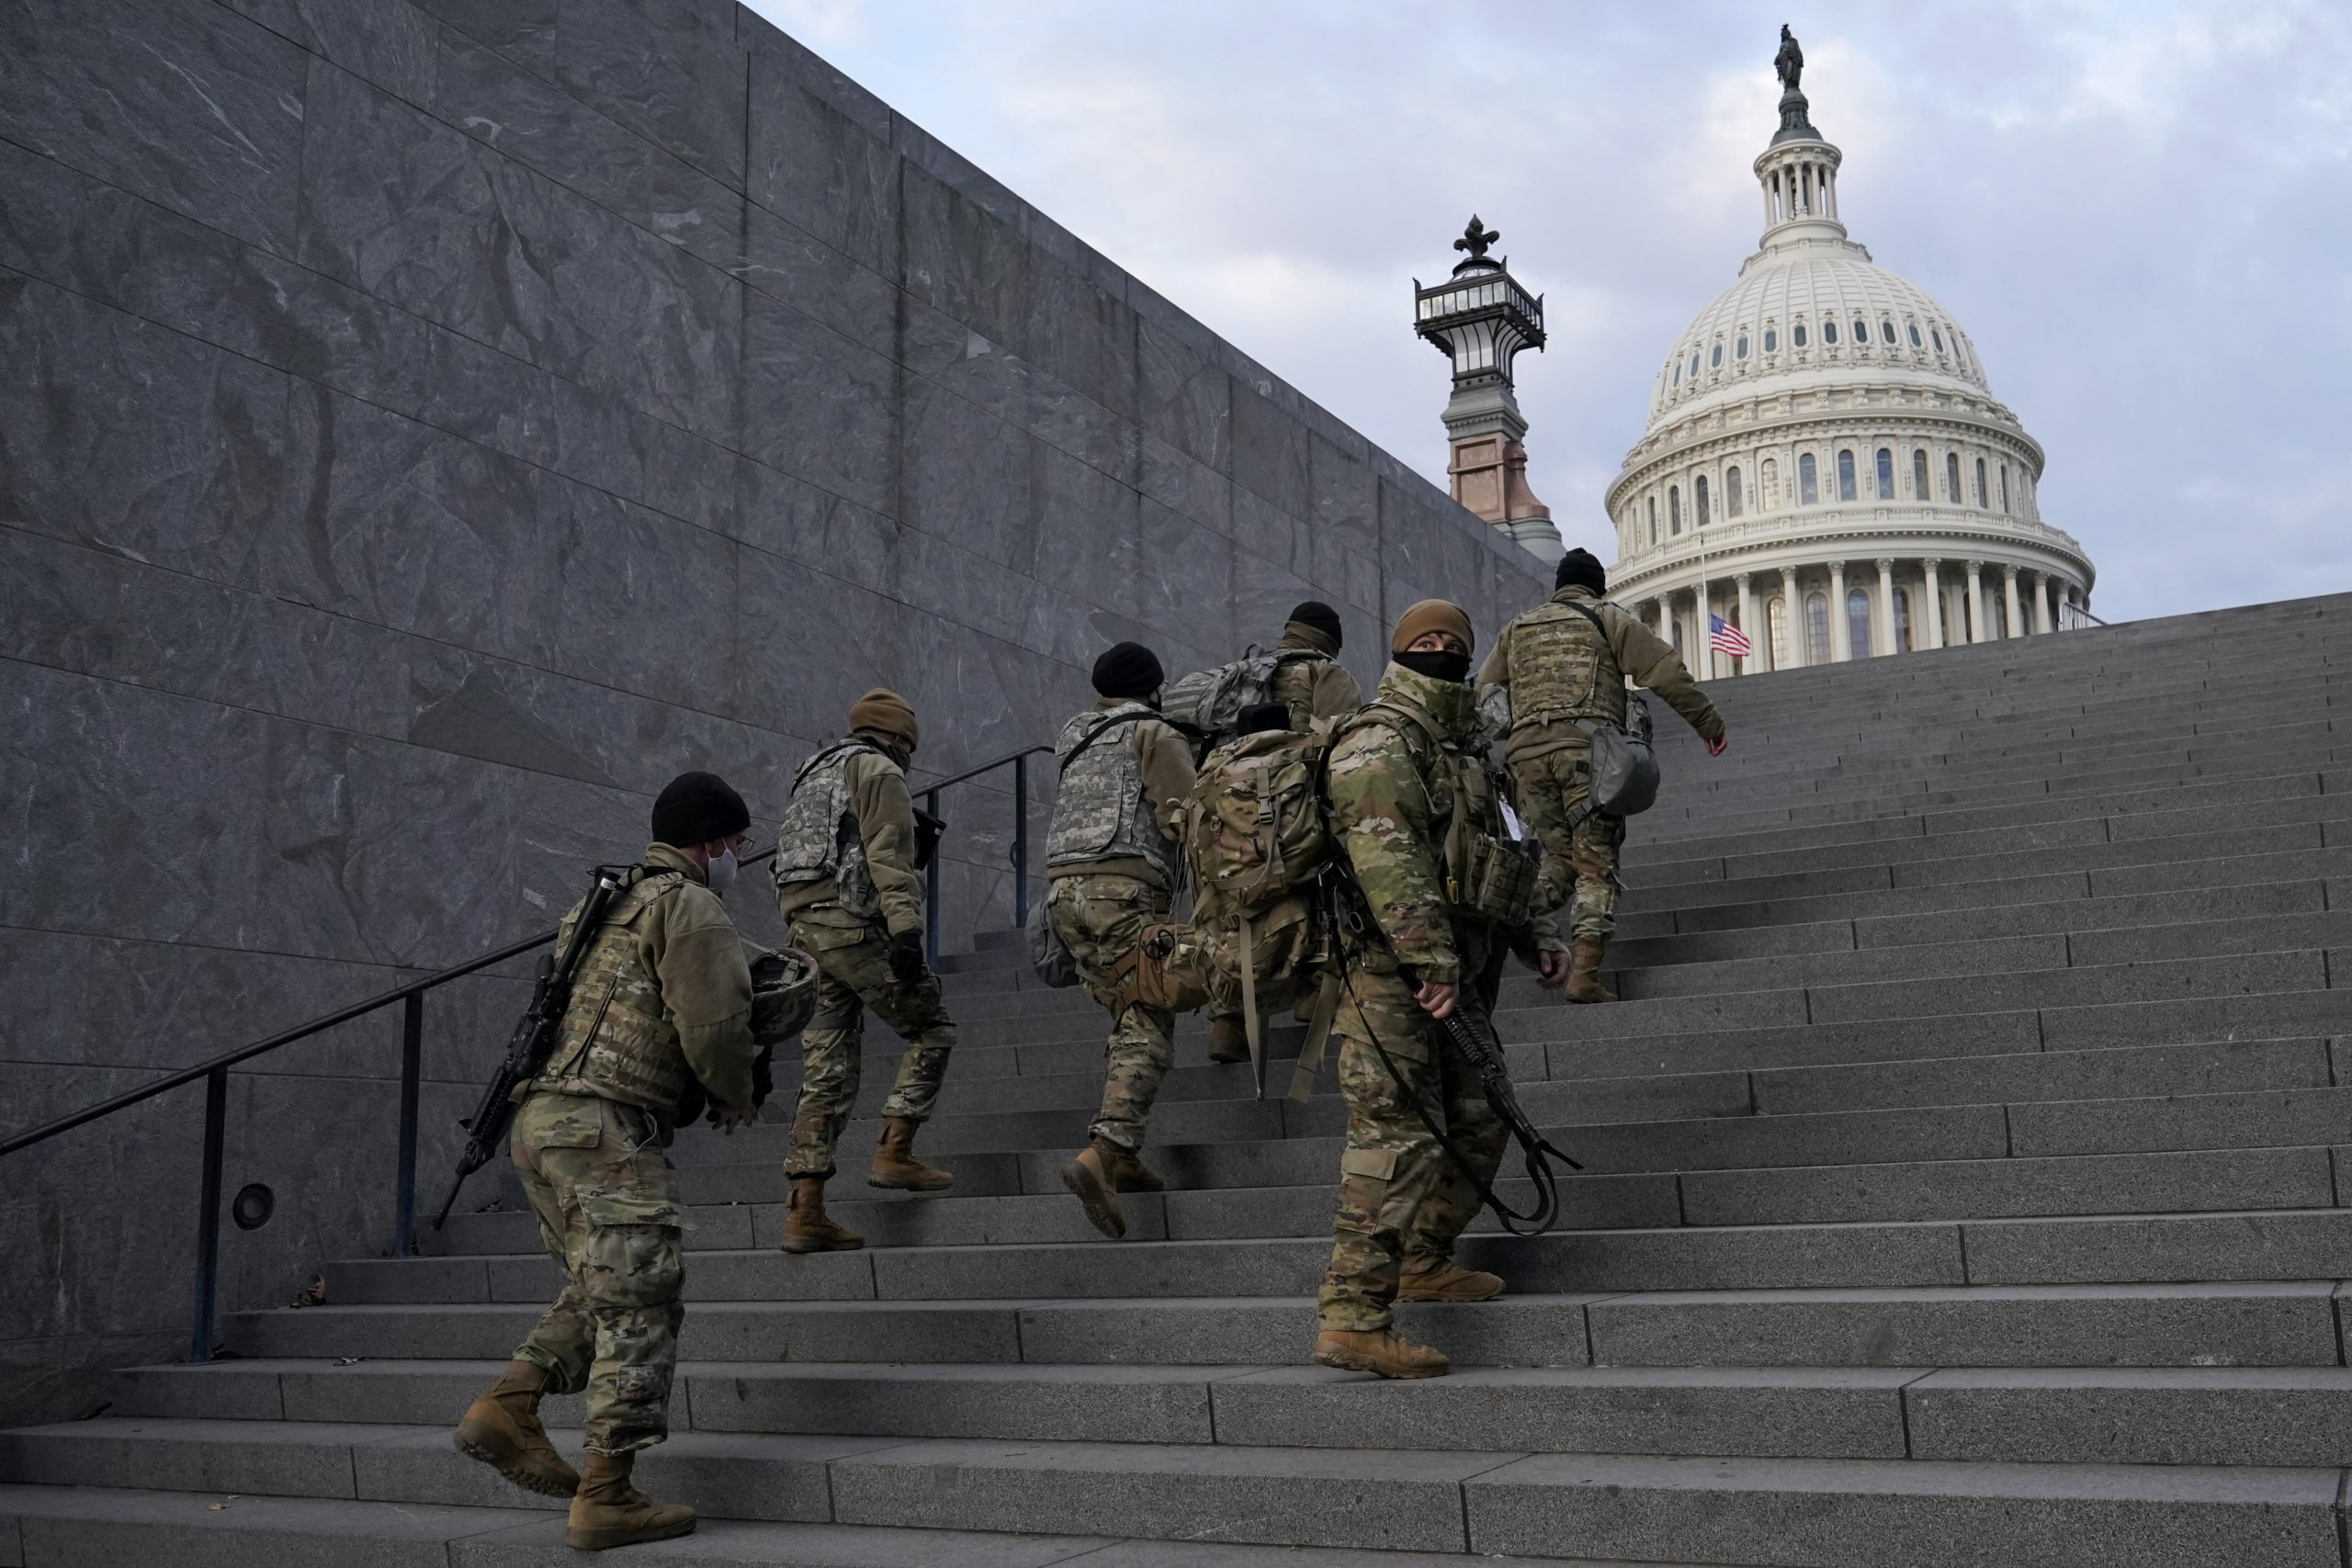 National Guard members take a staircase toward the U.S. Capitol building before a rehearsal for President-elect Joe Biden's inauguration in Washington, D.C., on Jan. 18, 2021.